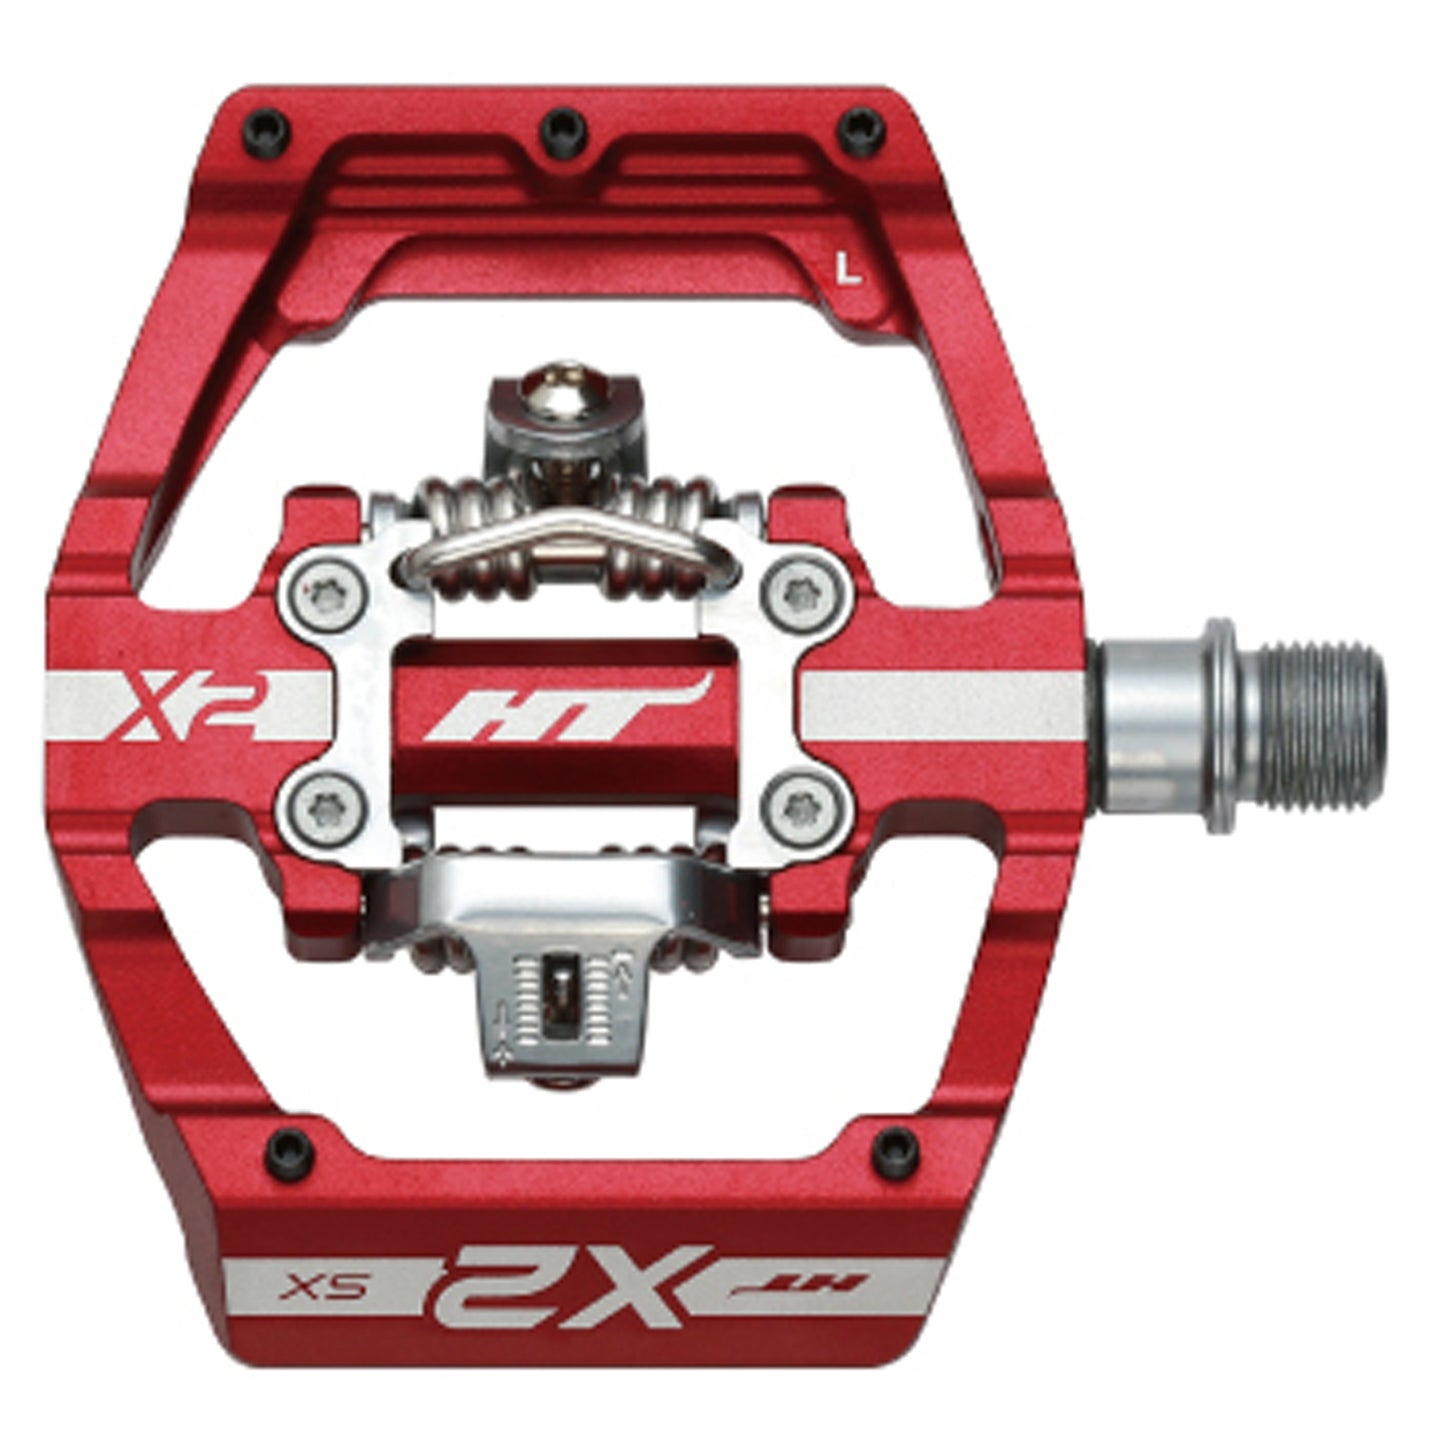 X2-SX Clipless Platform Pedals, CrMo - Red